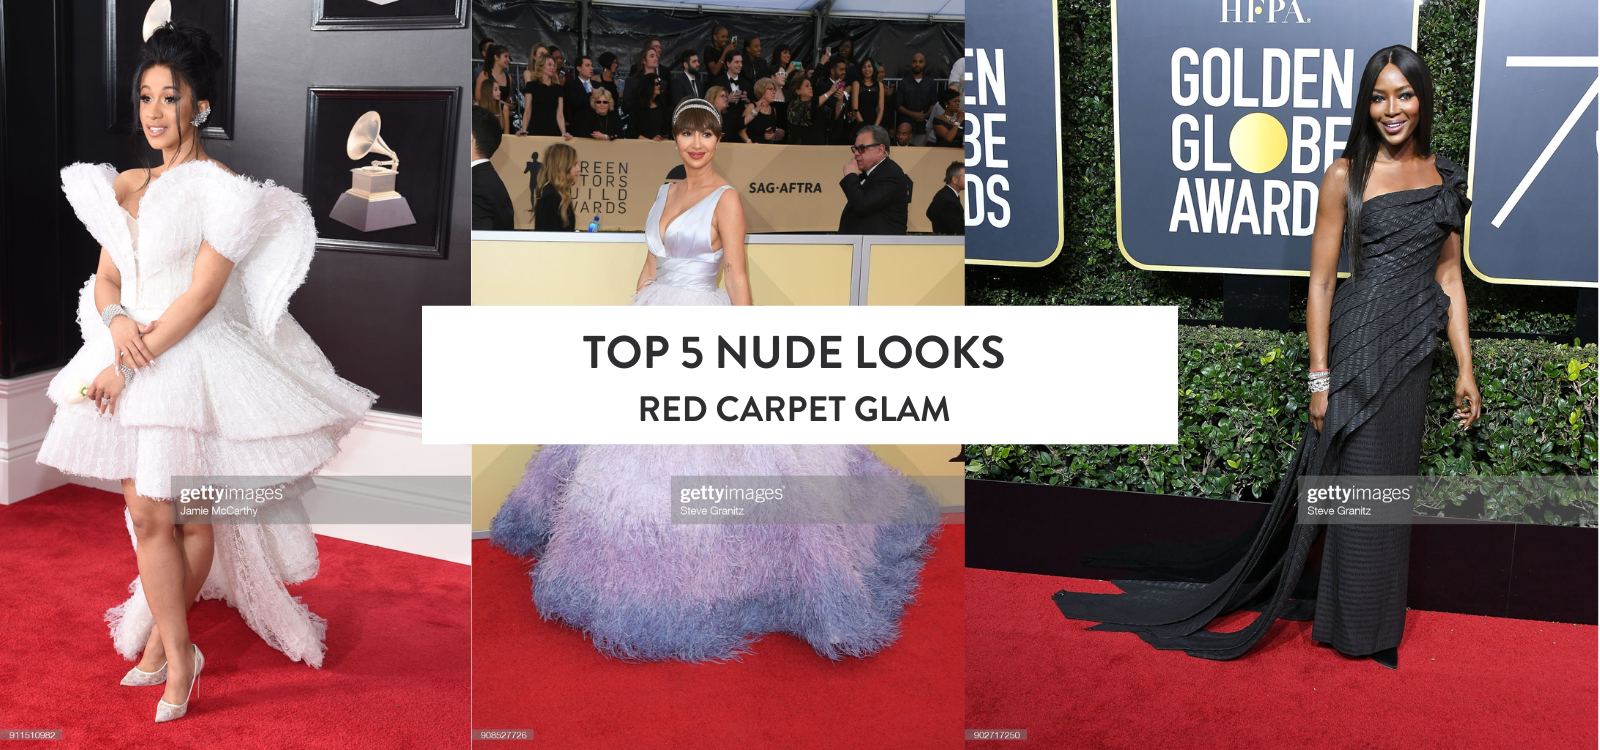 Top 5 Nude Looks: Red Carpet Glam